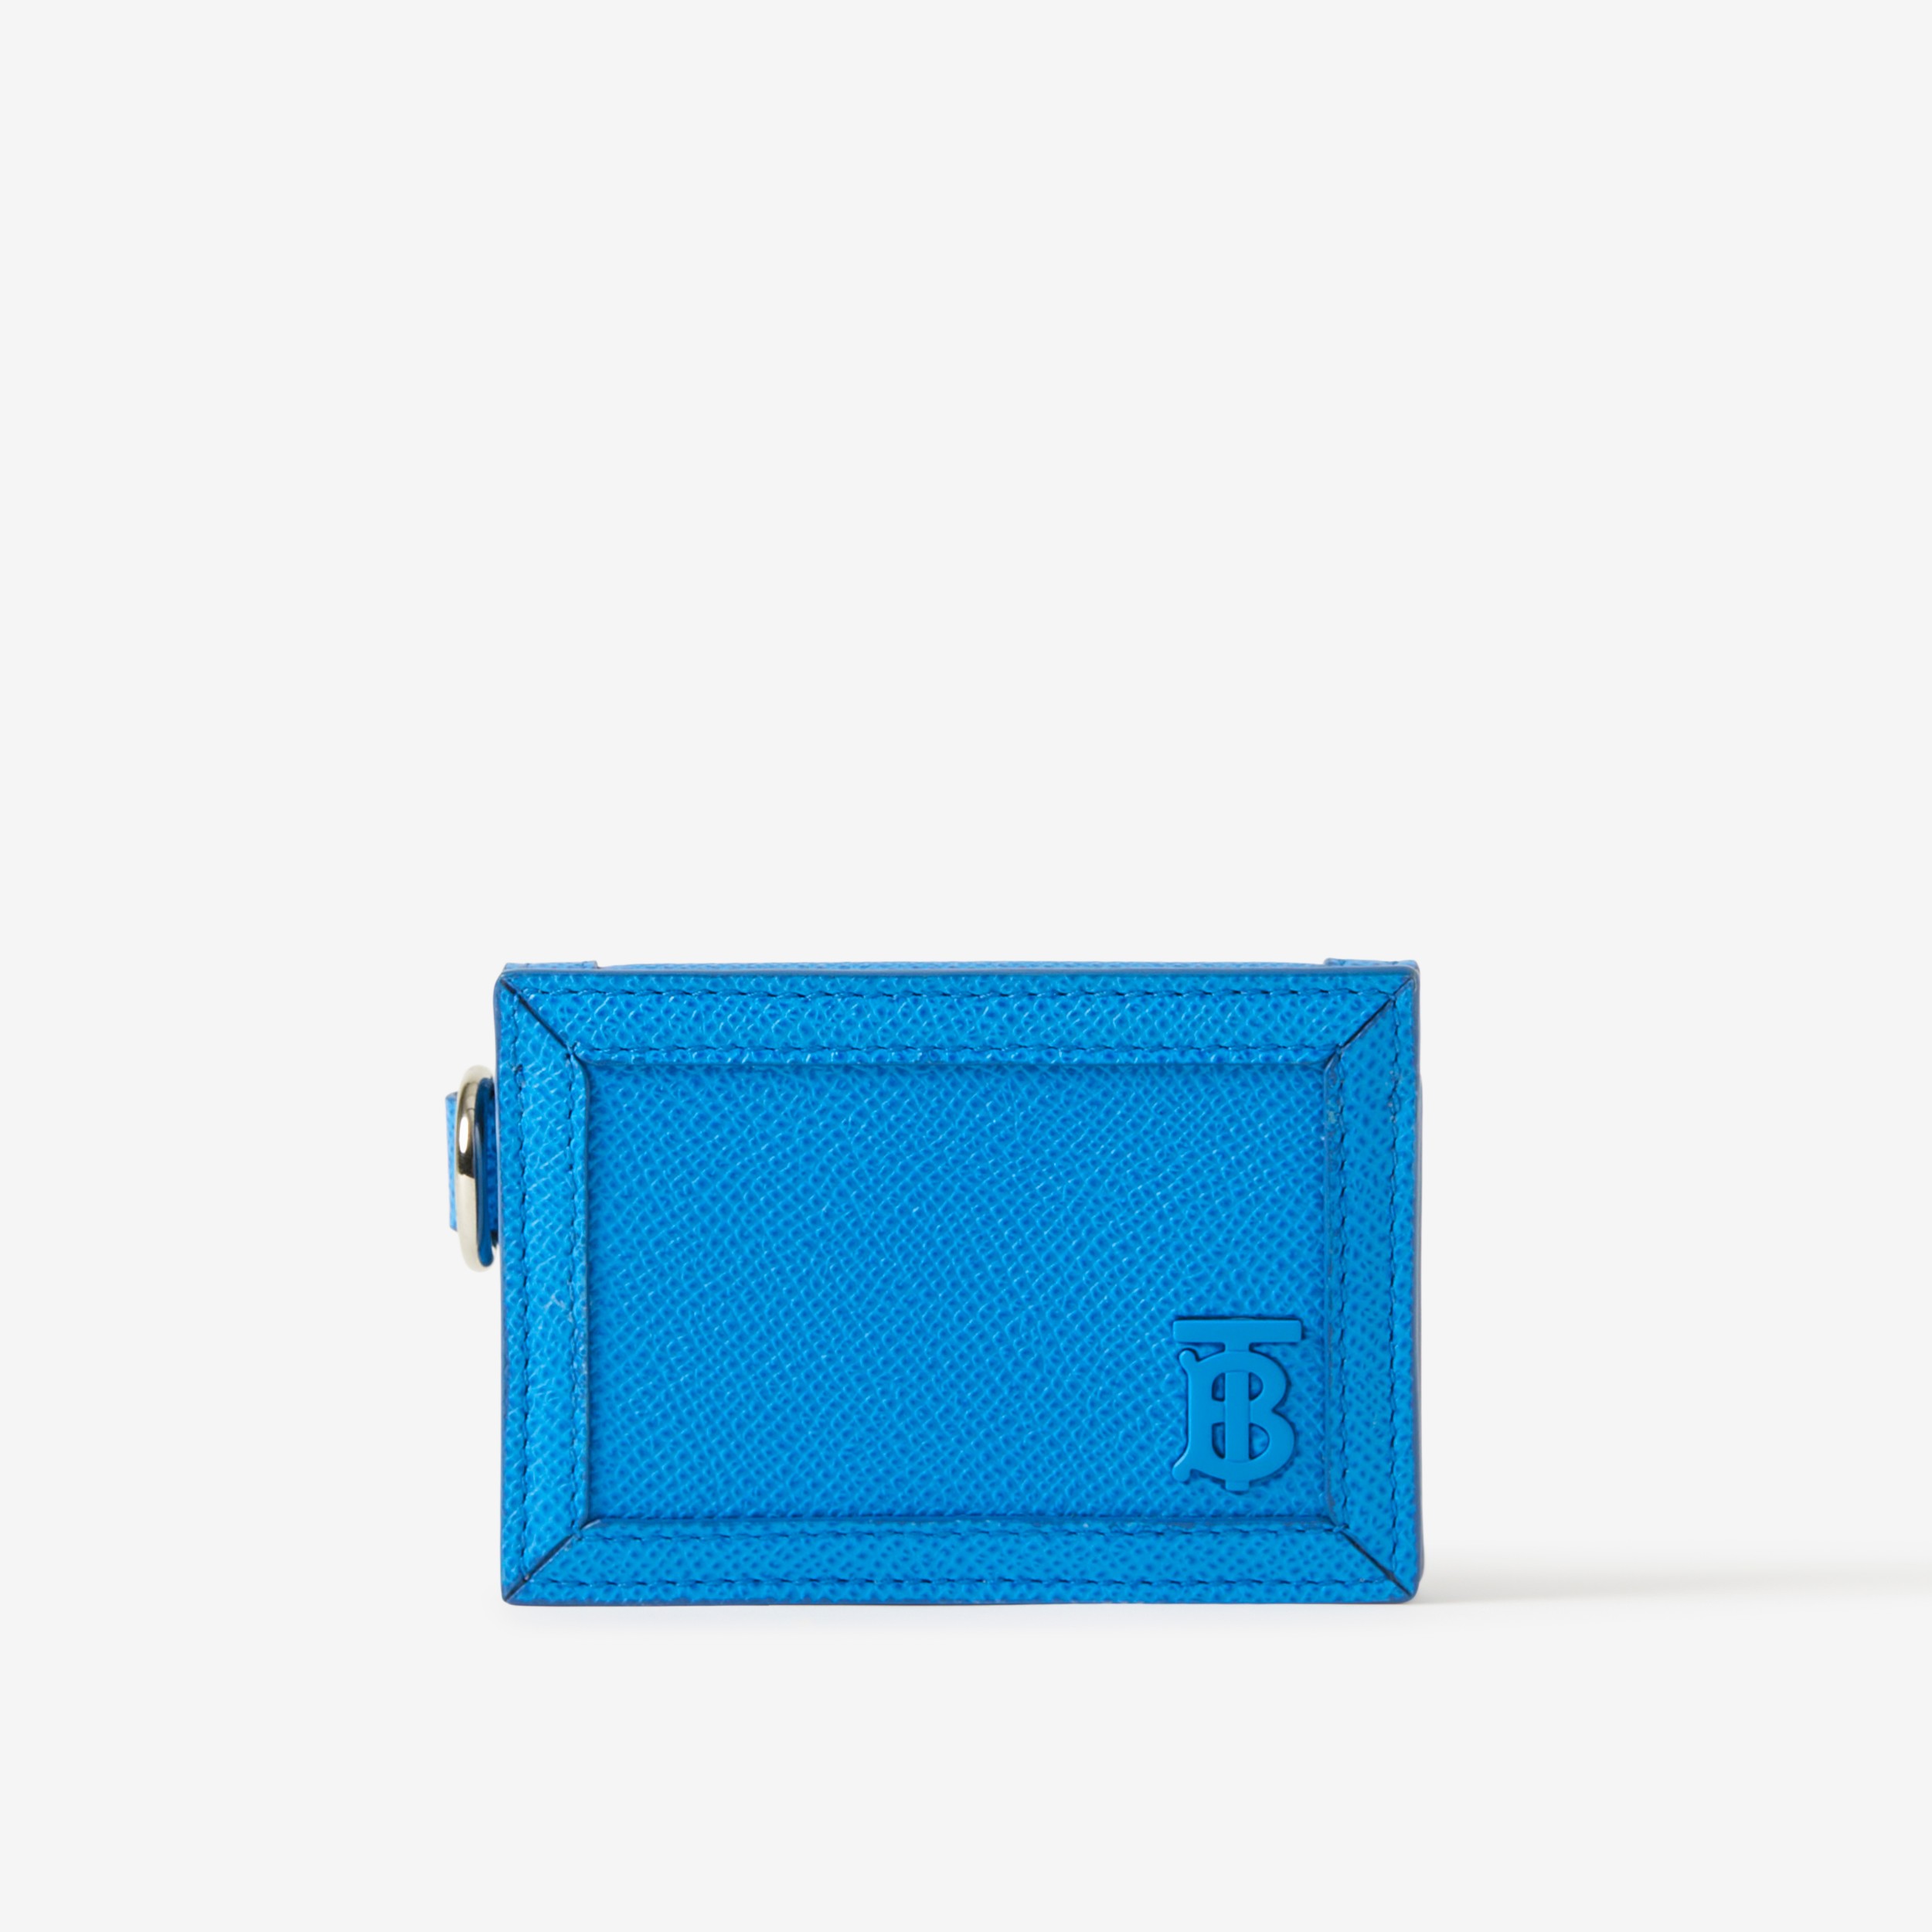 Grainy Leather TB Card Case Lanyard in Vivid Blue - Men | Burberry® Official